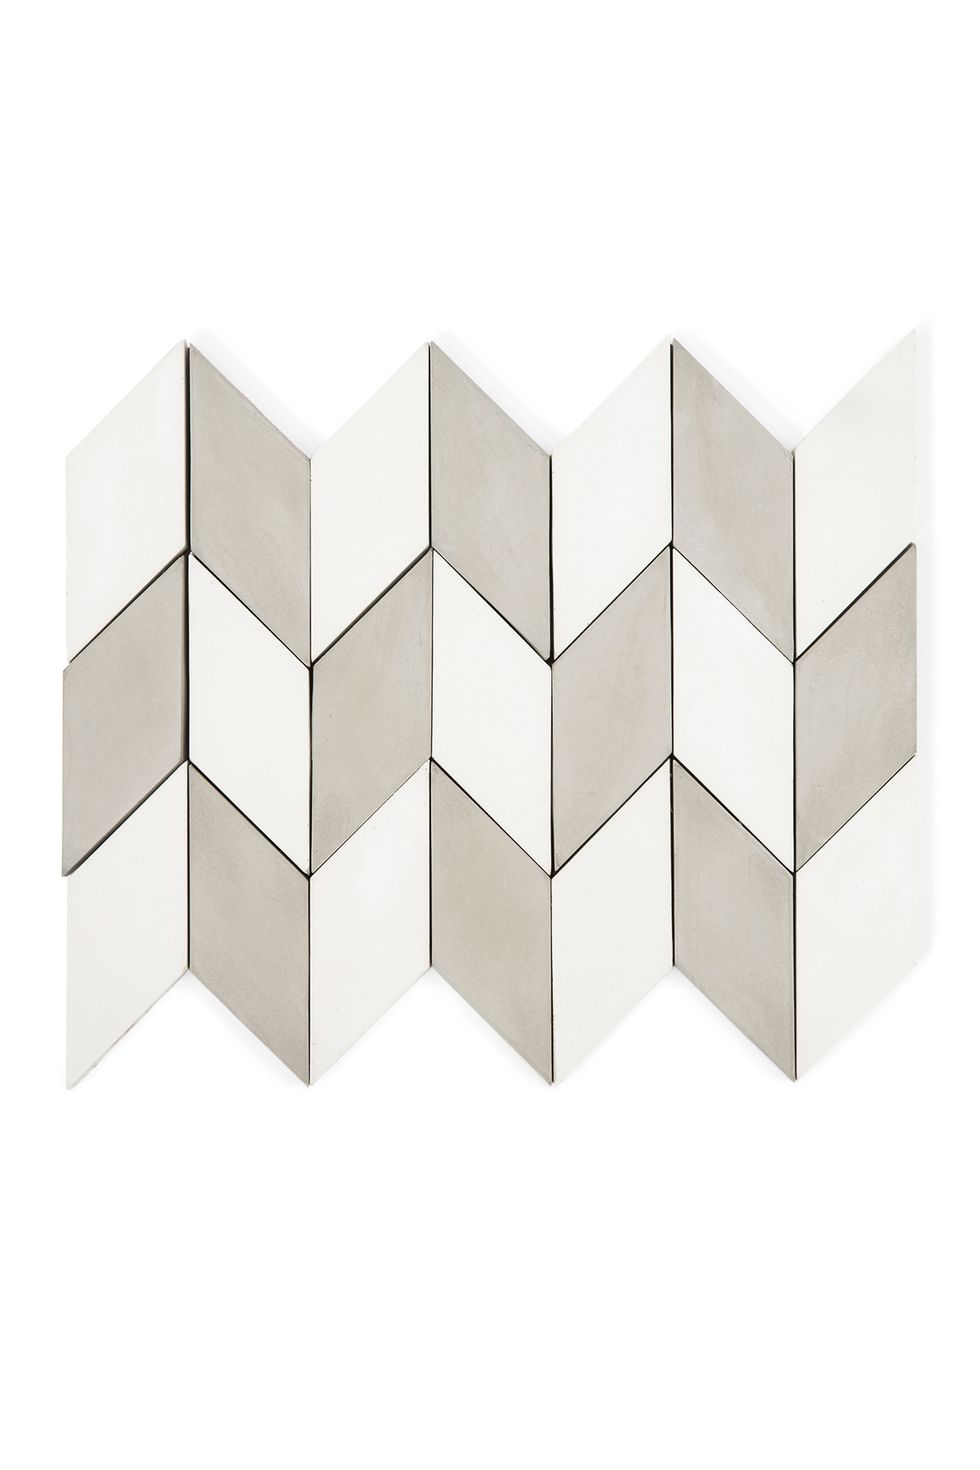 Rectangle, Parallel, Beige, Symmetry, Square, Silver, 